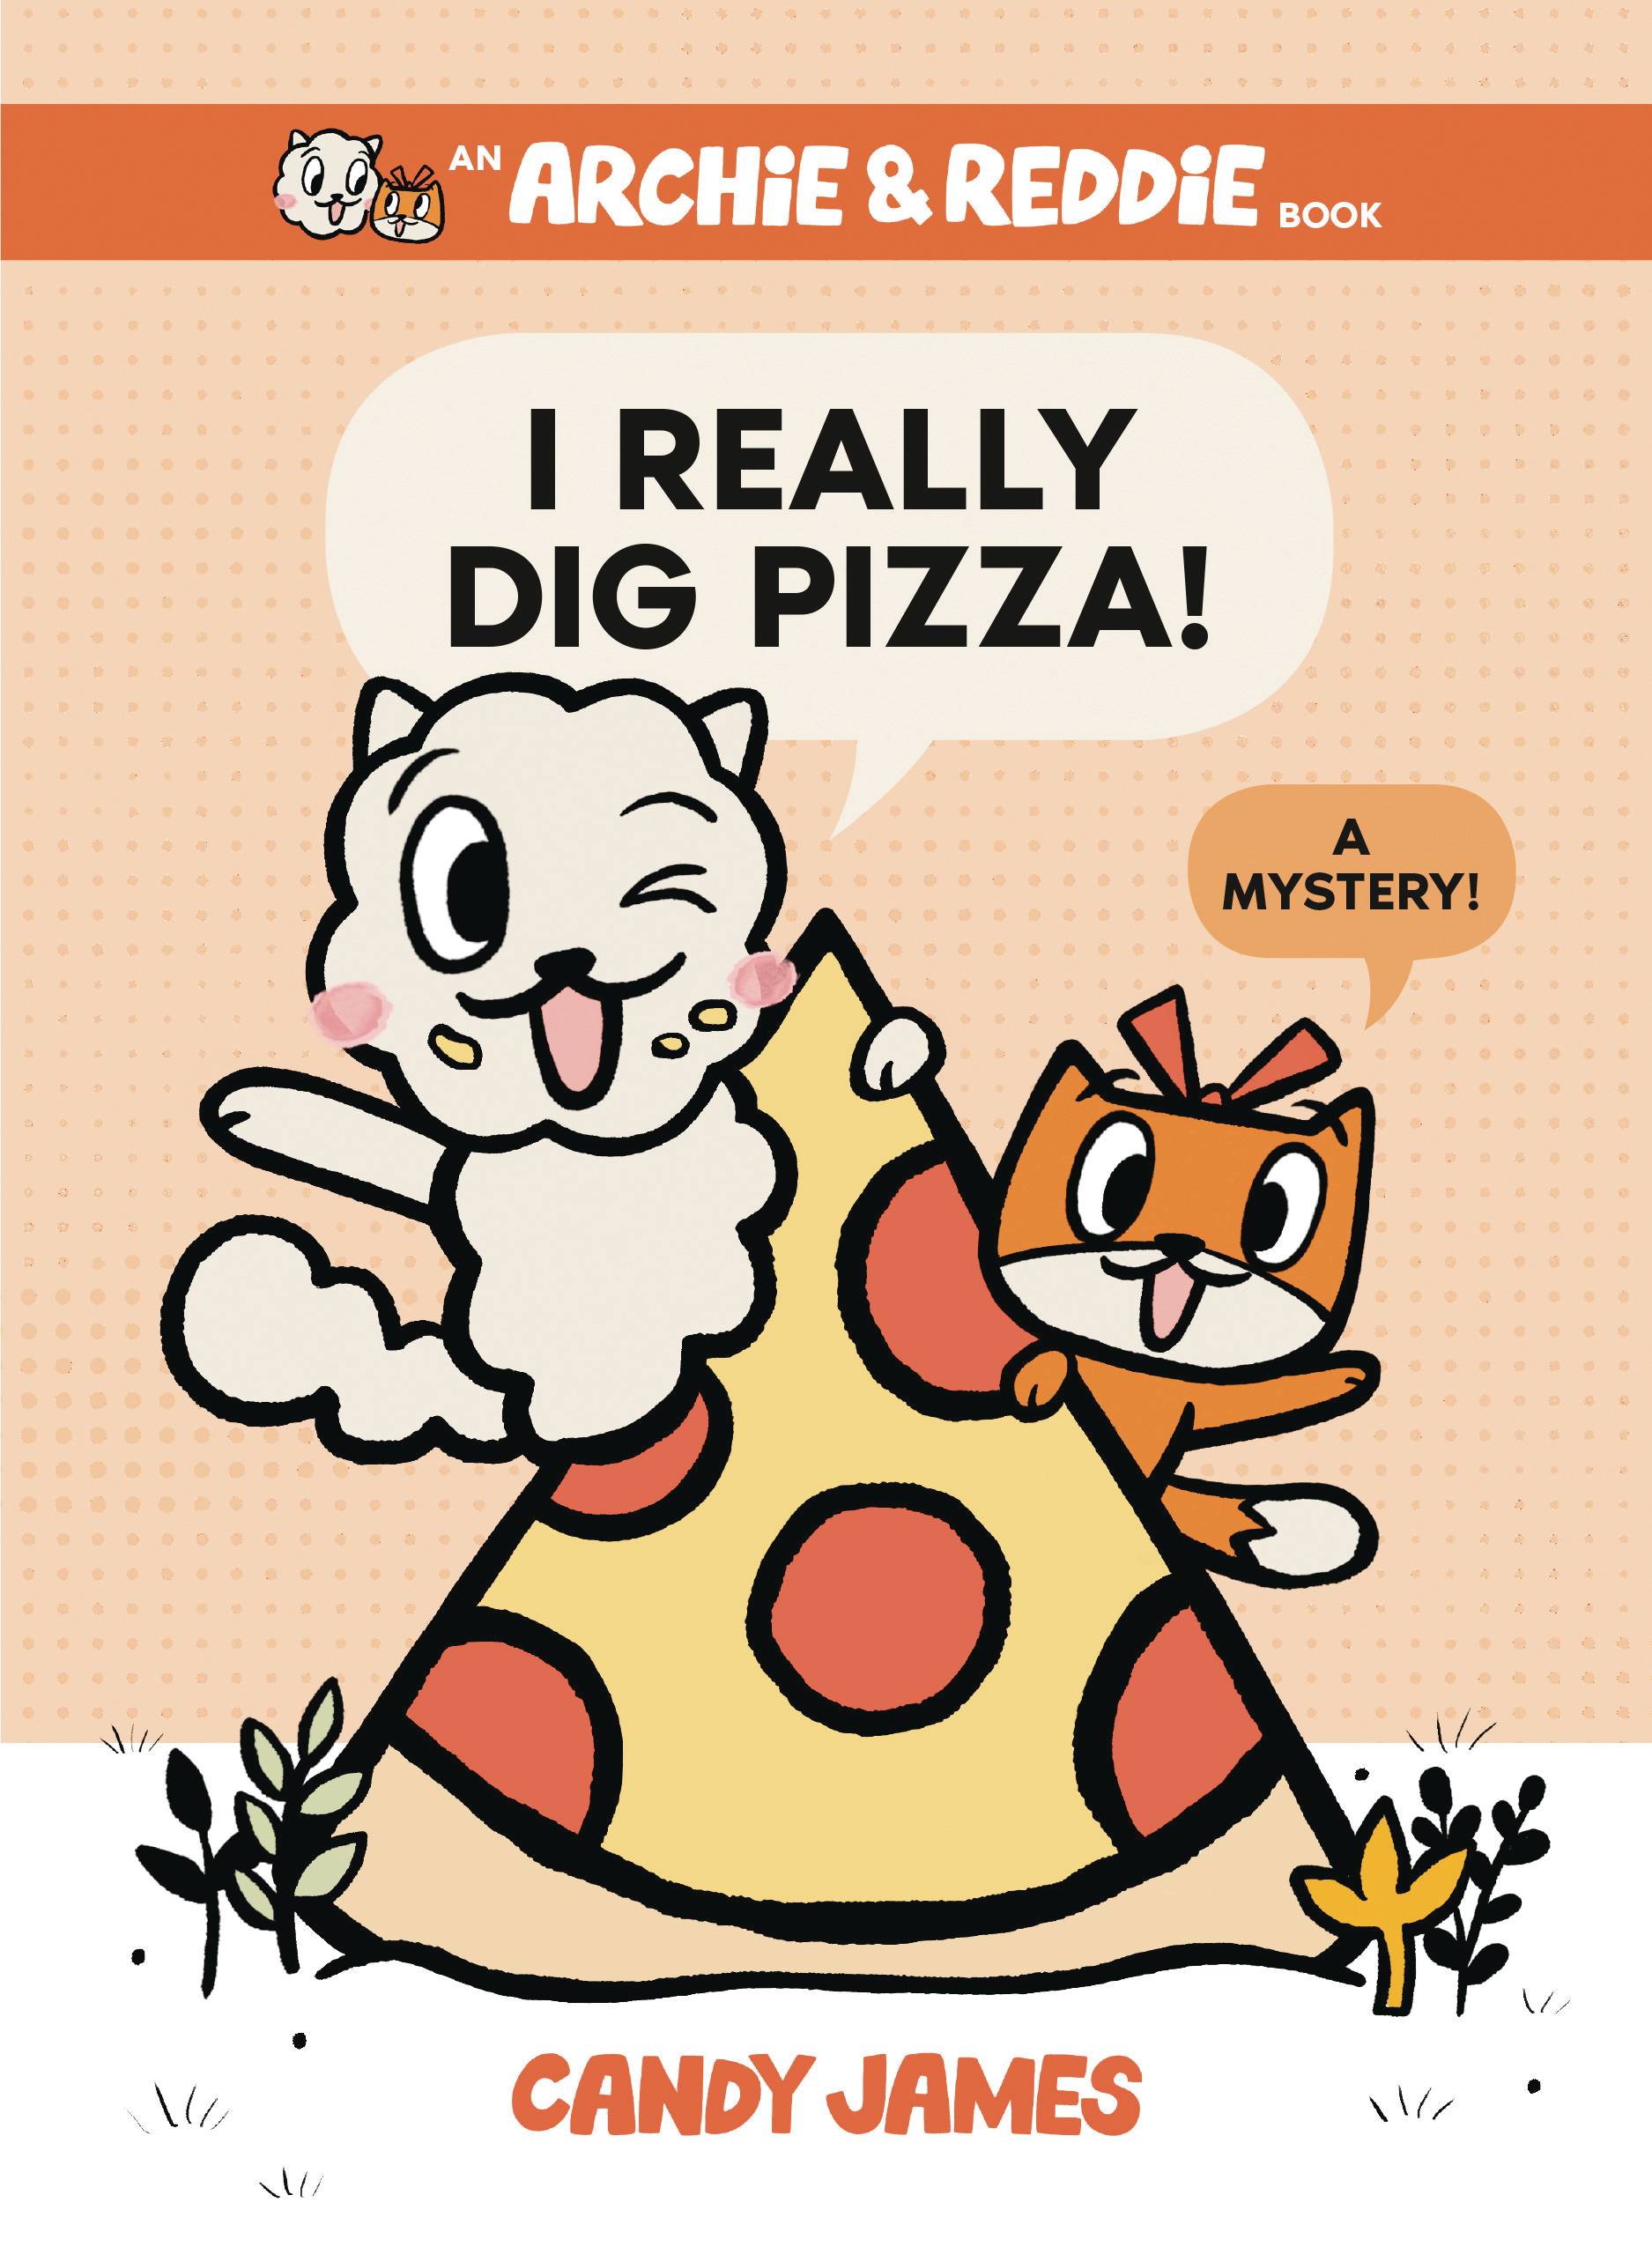 ARCHIE & REDDIE TP 01 I REALLY DIG PIZZA  A MYSTERY